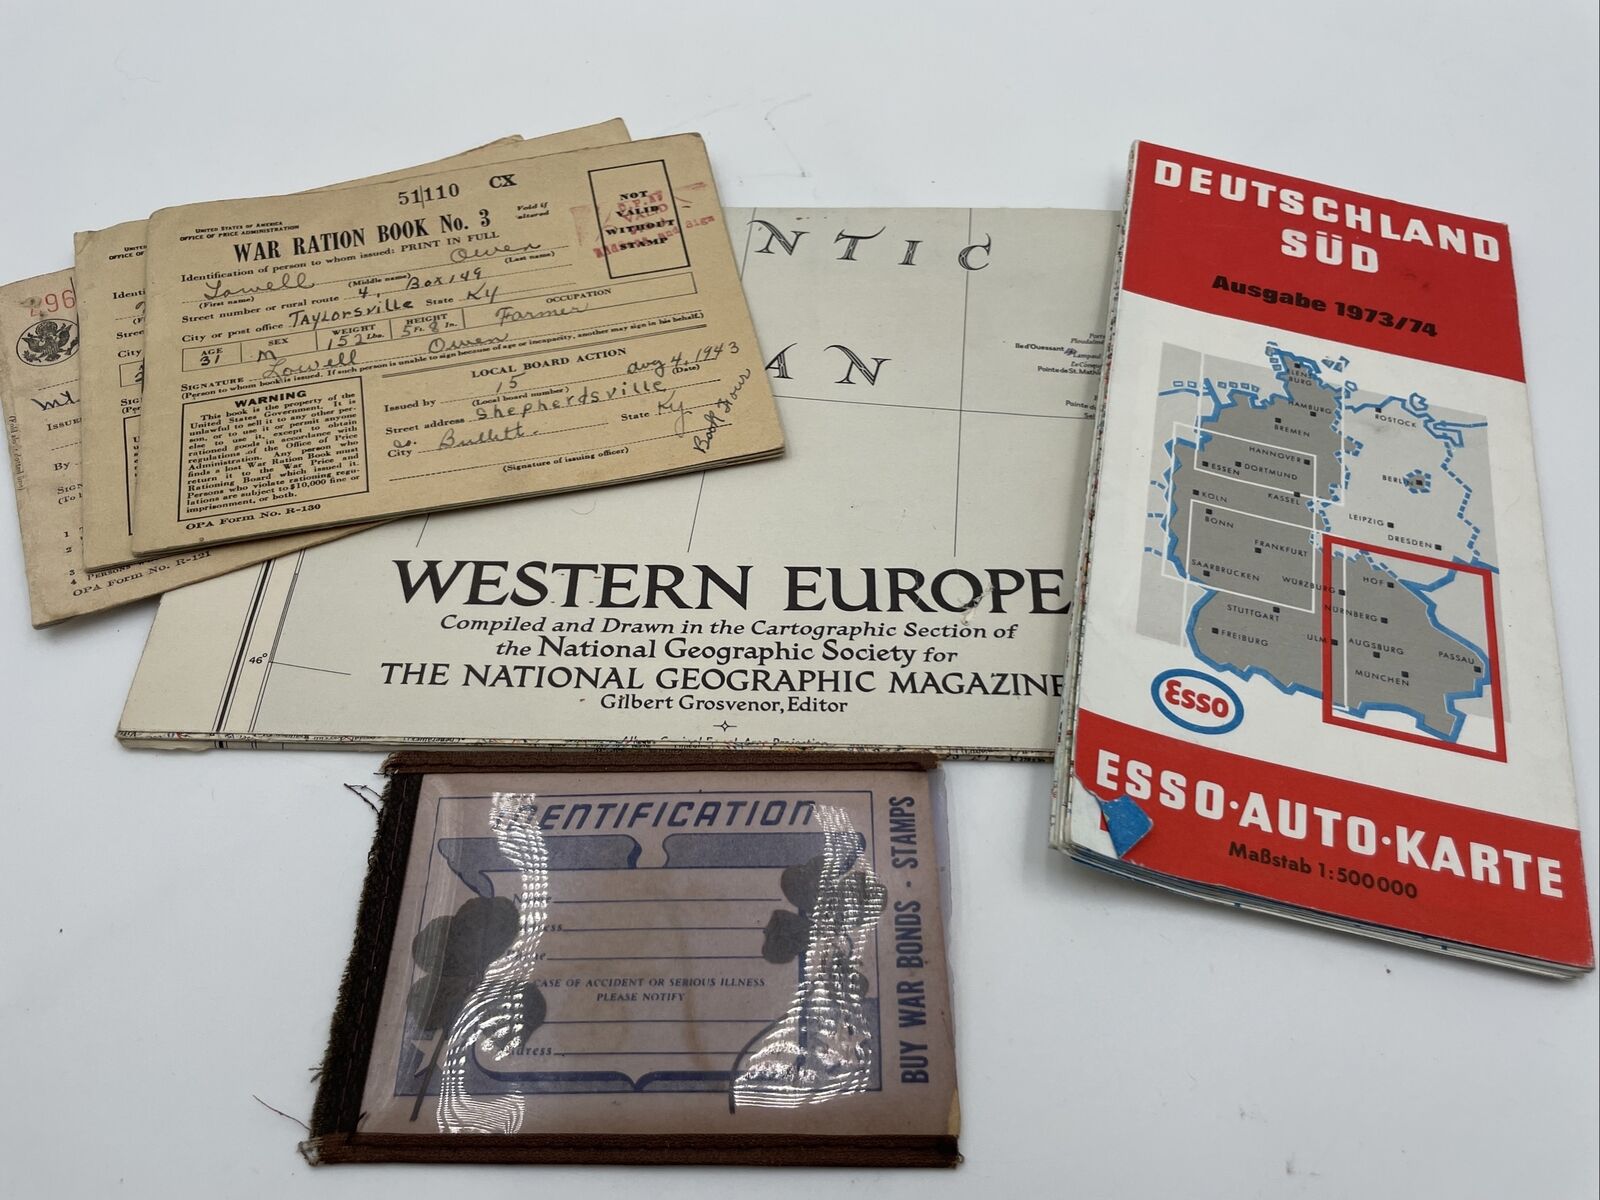 Vintage WWII War Ration Books With Stamps Maps and ID Card Ephemera Antique